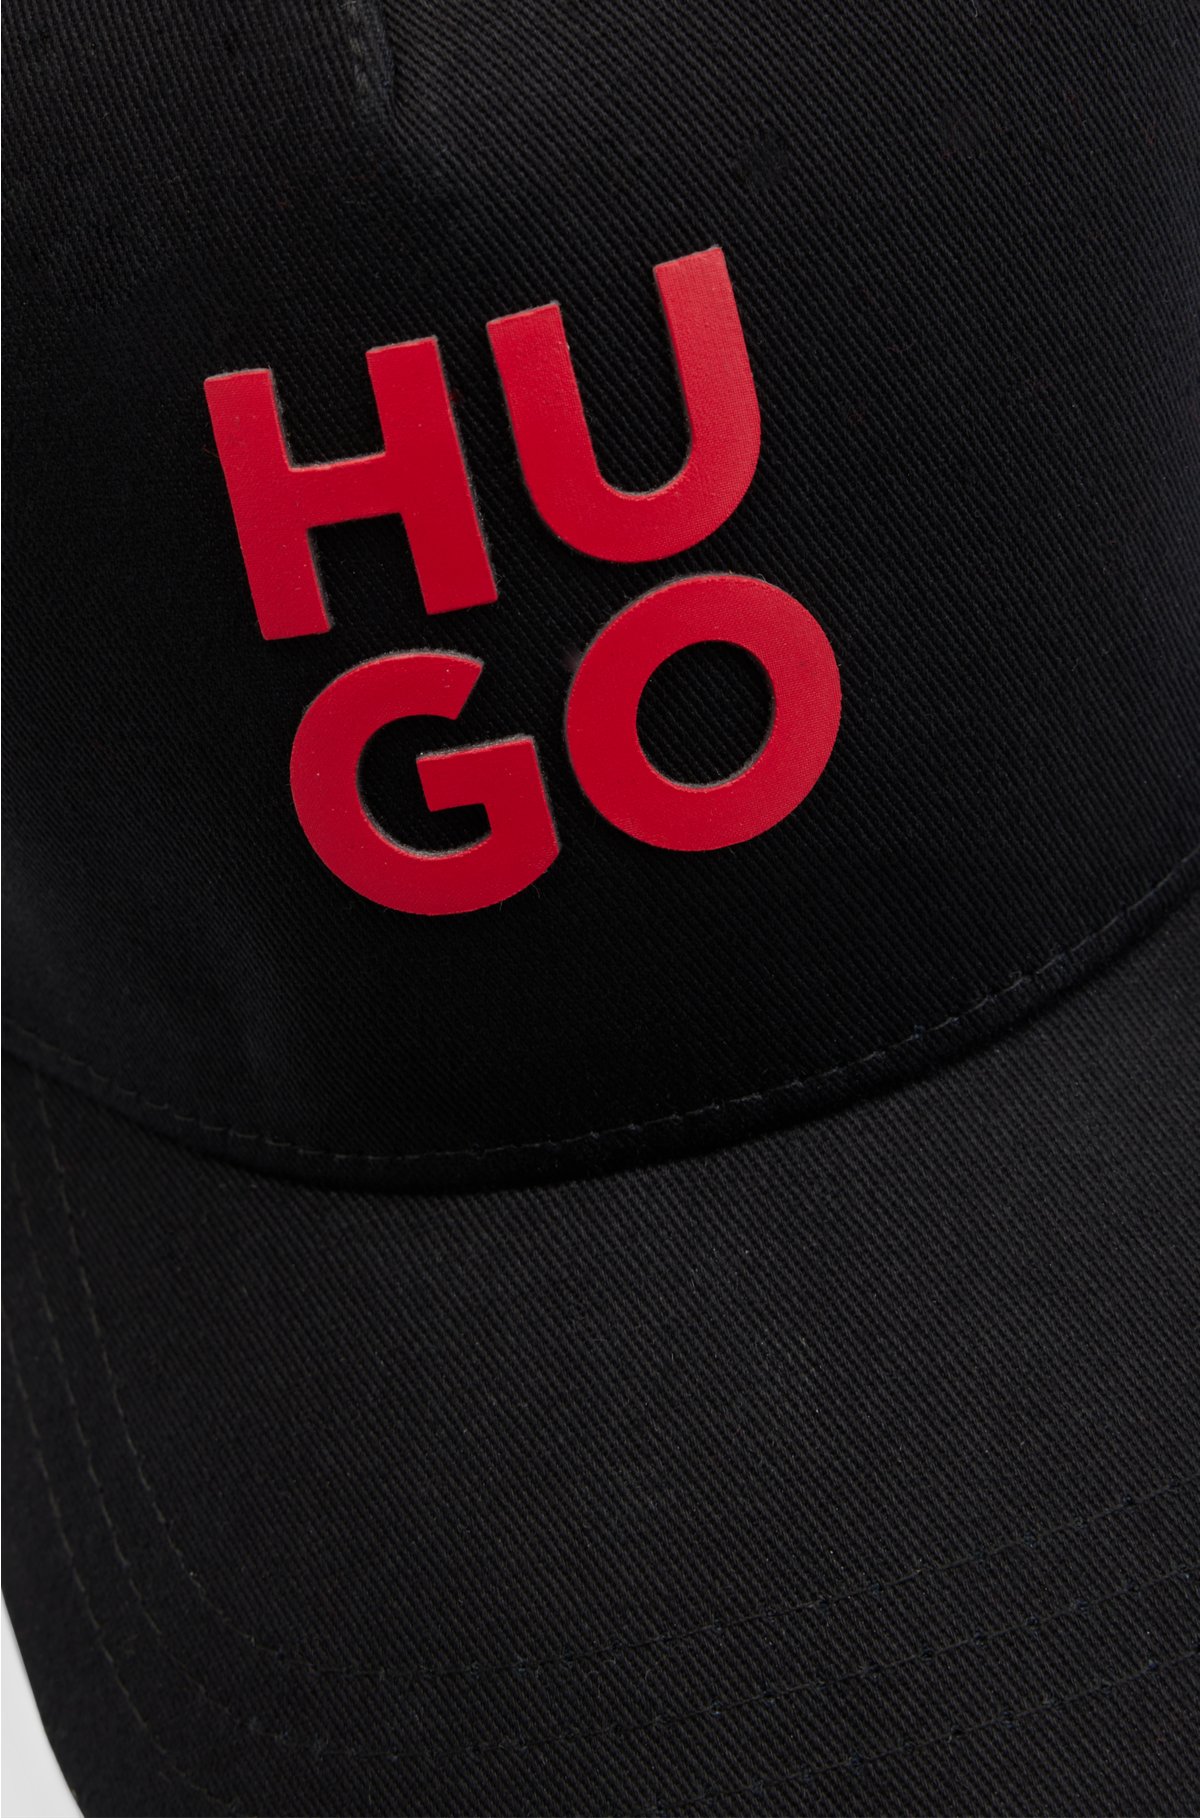 Kids' cap in cotton twill with stacked logo, Black